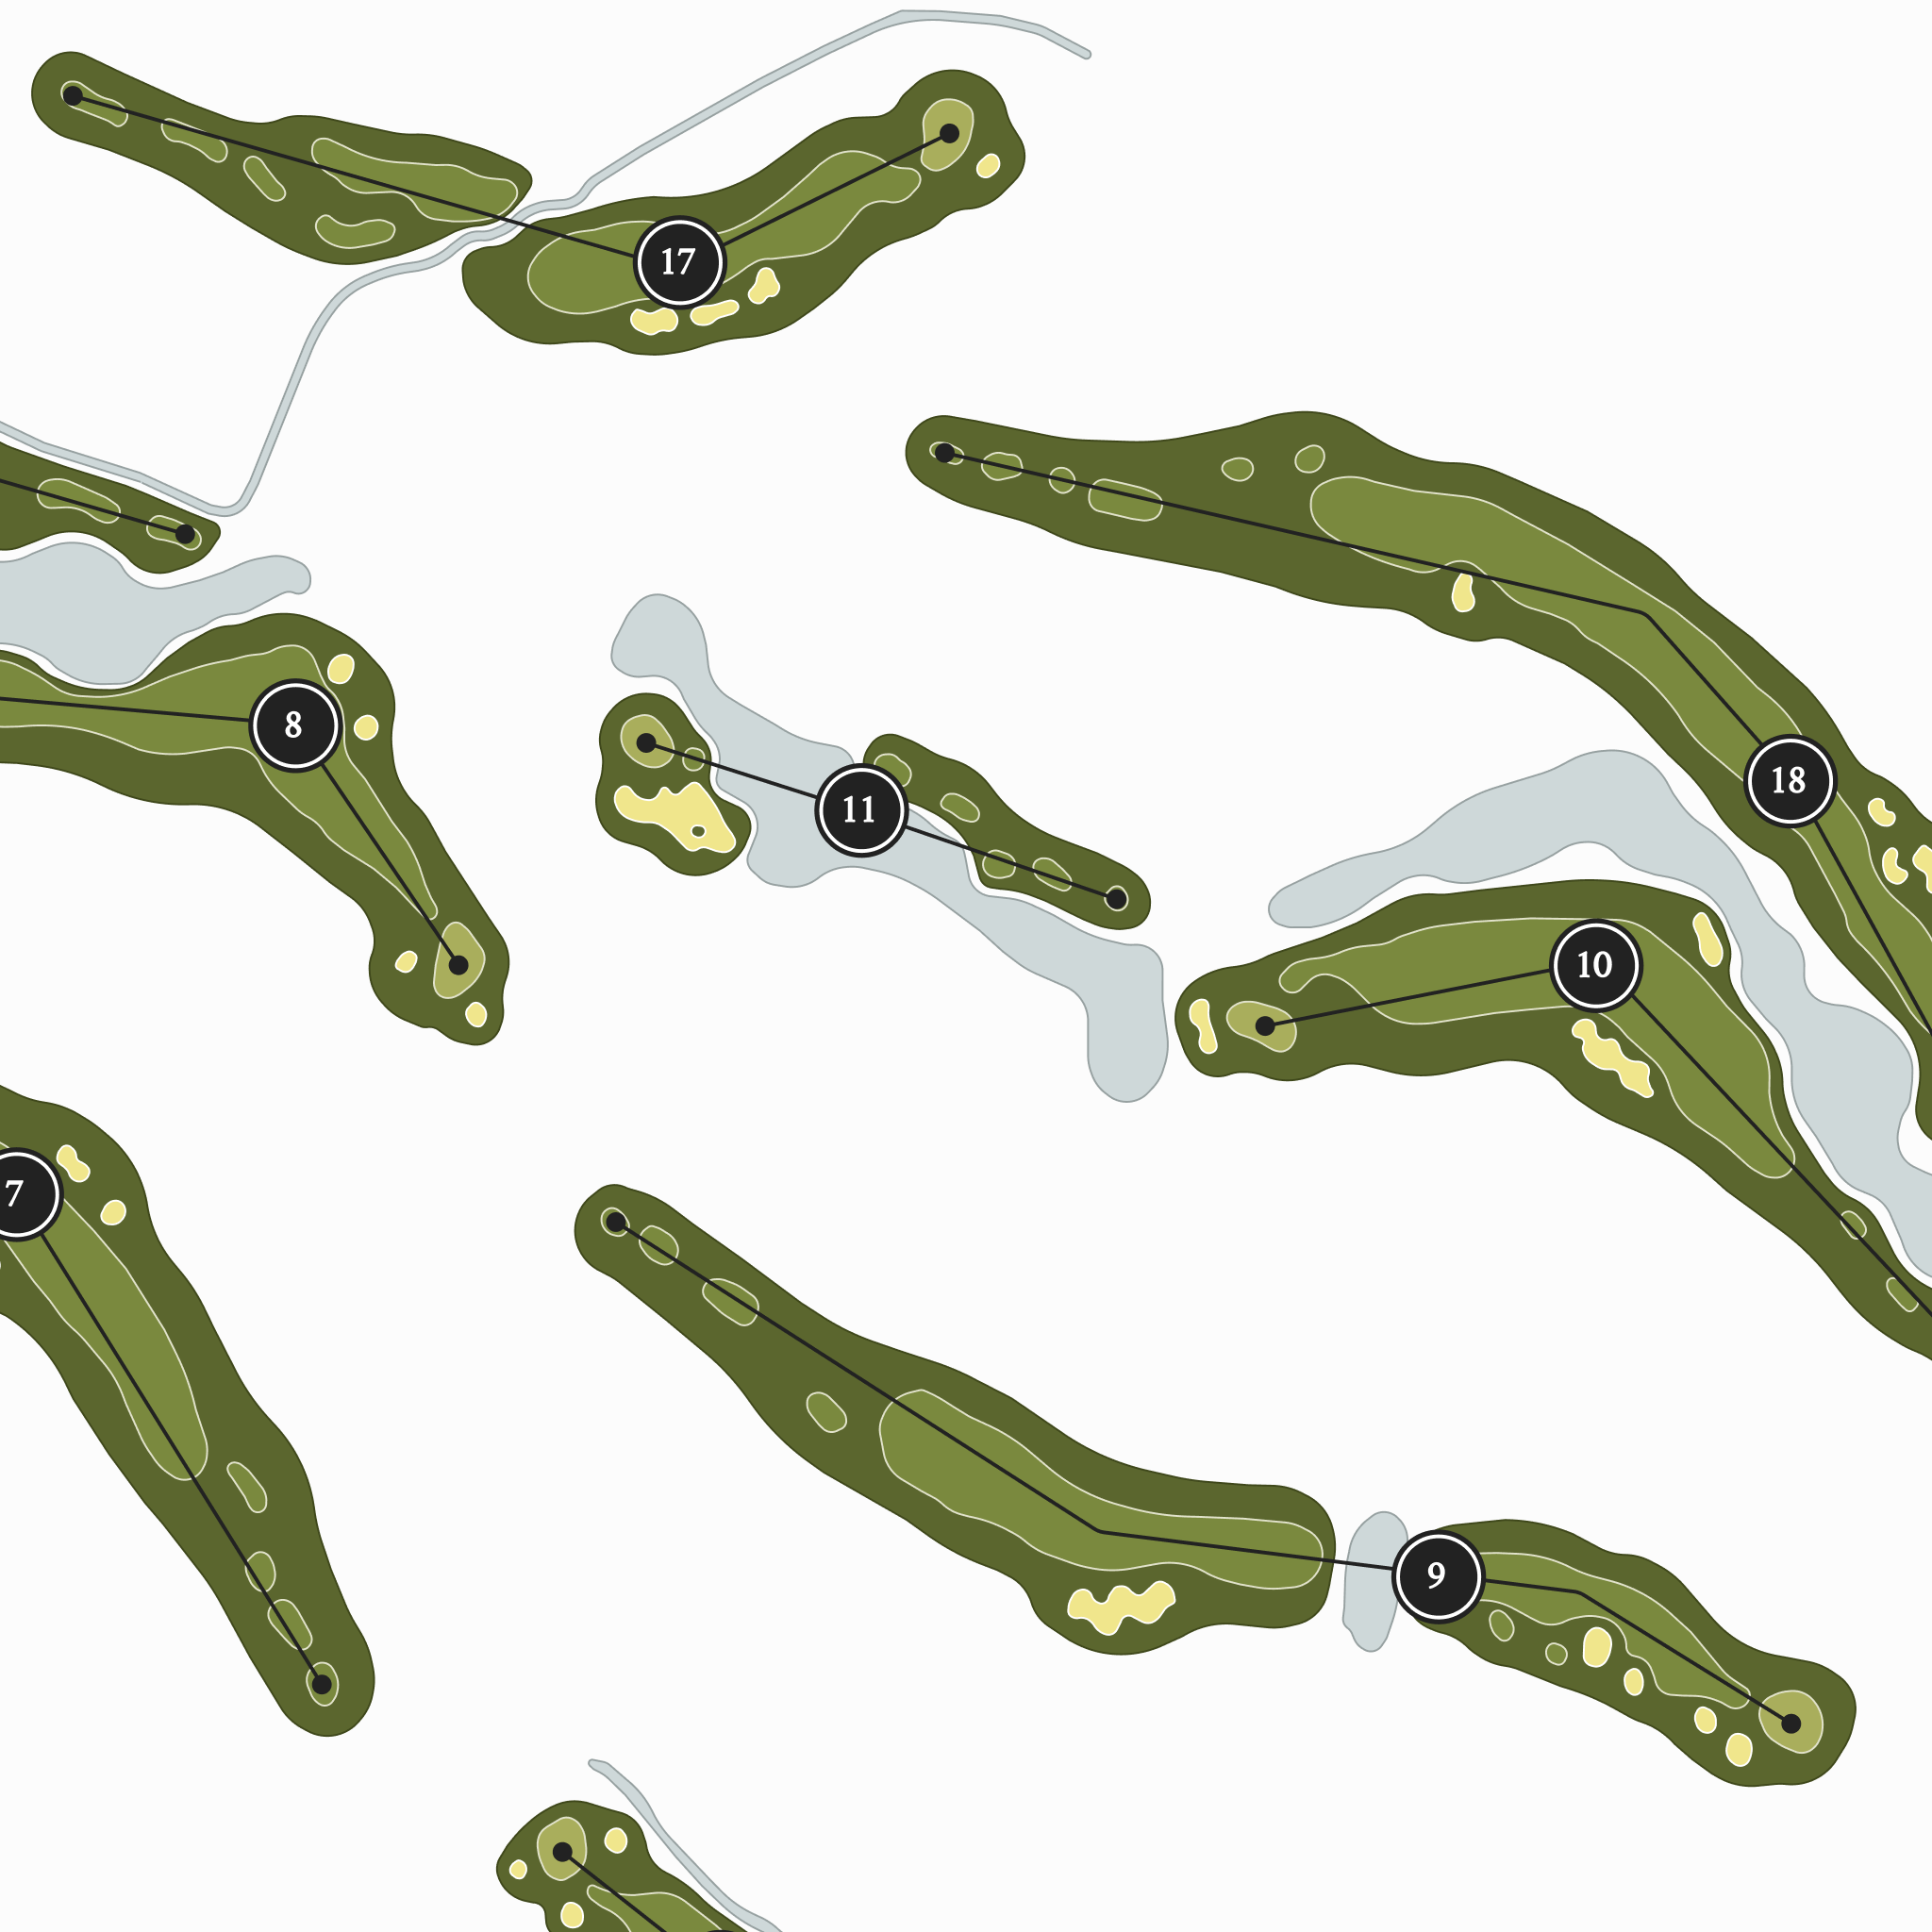 Indigo Creek Golf Club | Golf Course Map | Close Up With Hole Numbers #hole numbers_yes